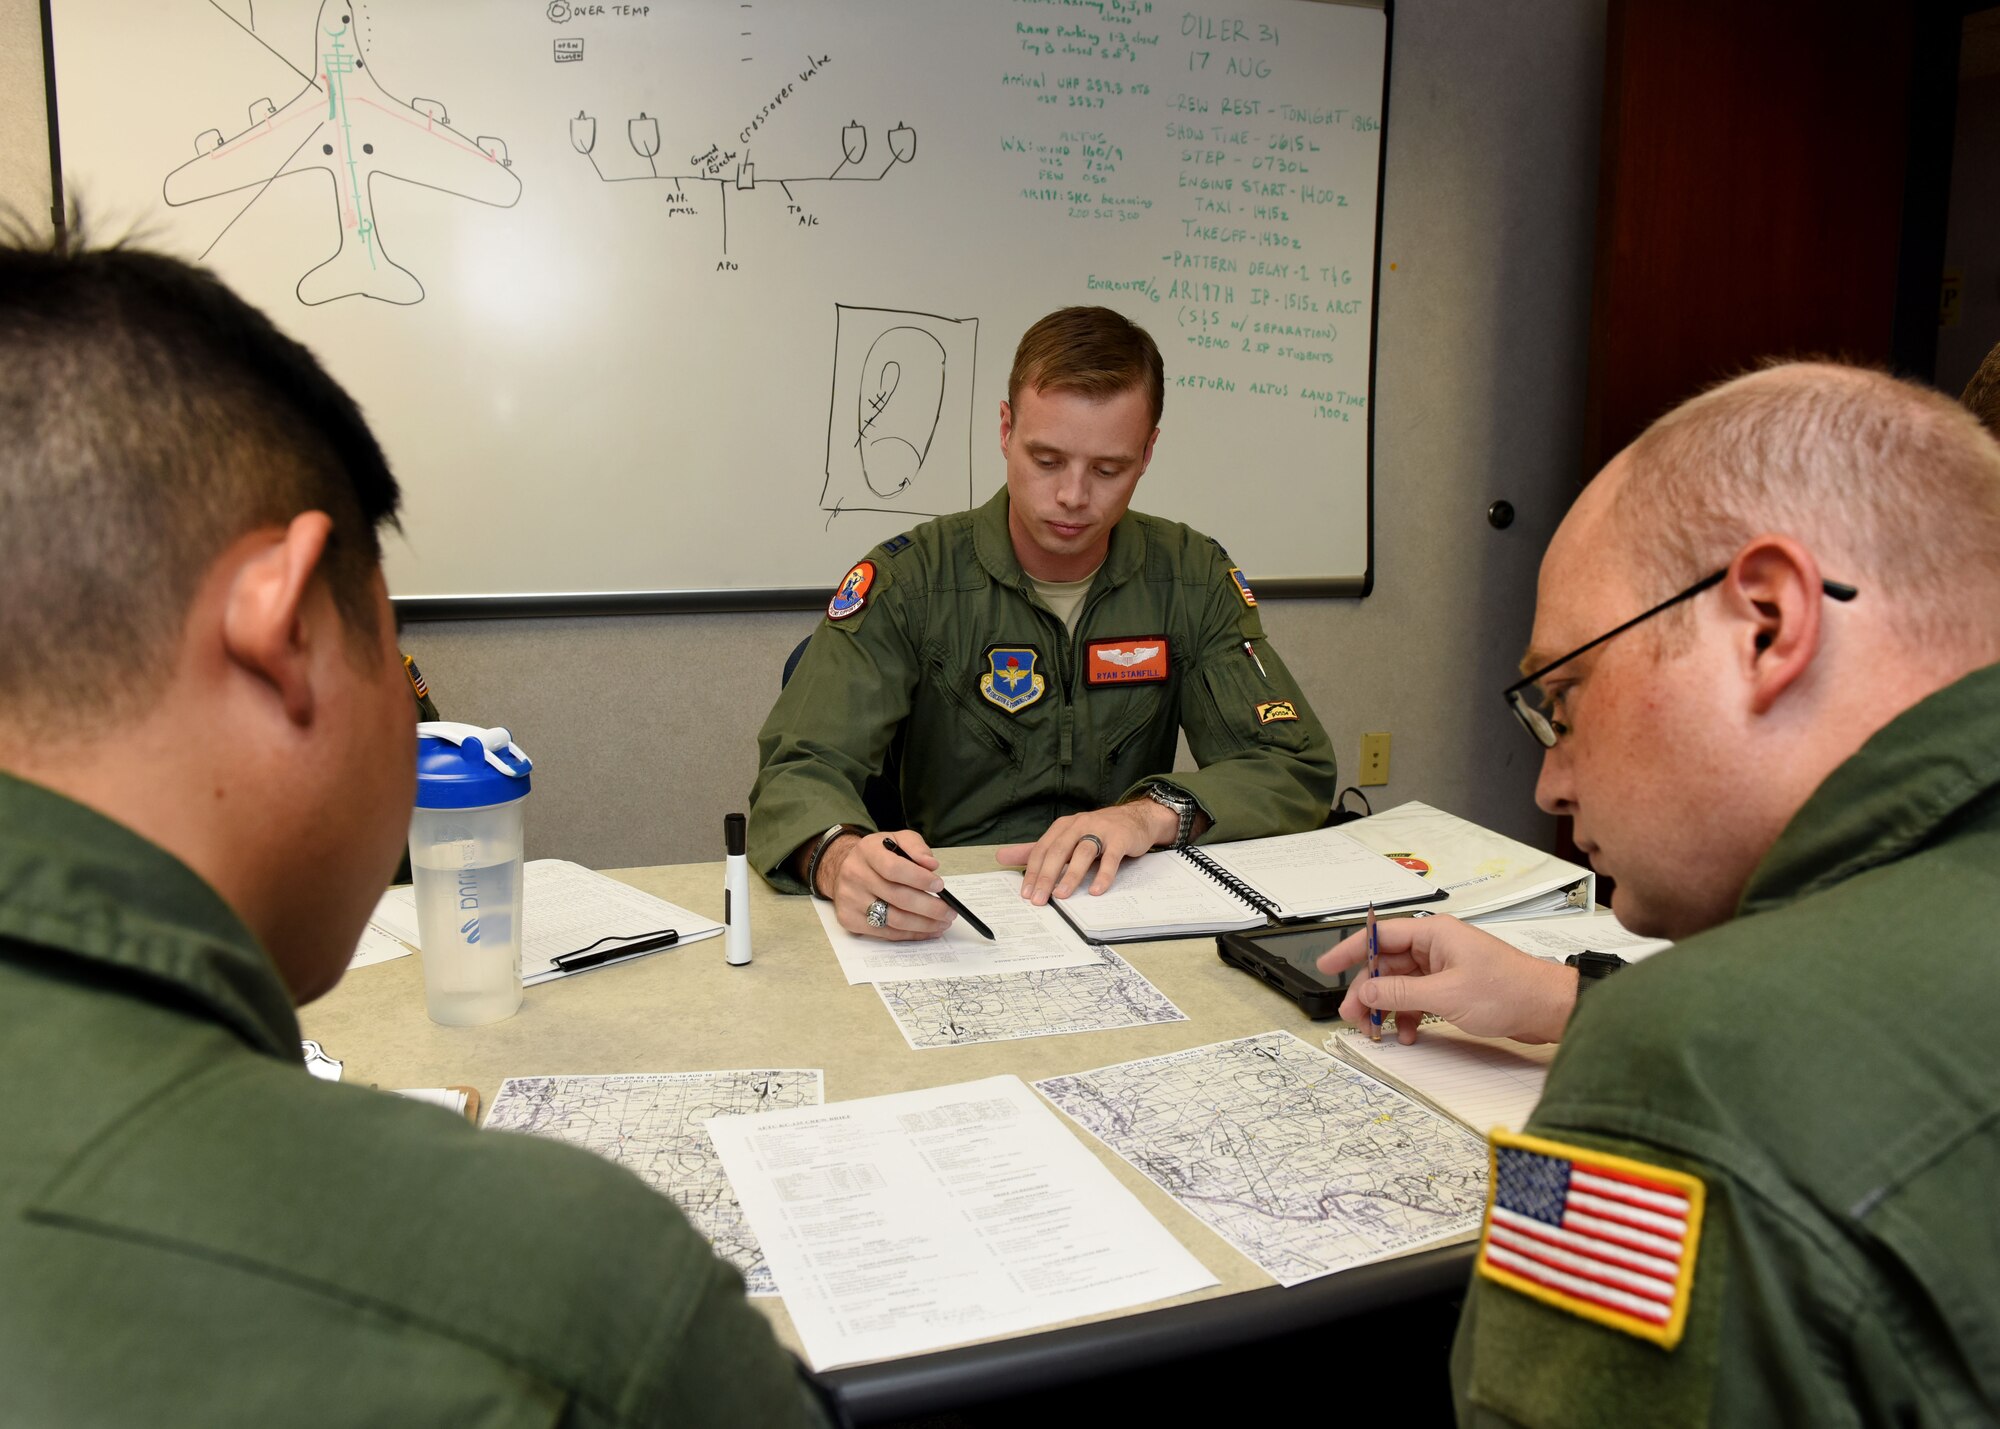 U.S. Air Force Capt. Ryan Stanfill, 97th Operations Support Squadron flight commander, reviews details for a training flight, August 18, 2016, at Altus Air Force Base, Okla. Stanfill attended high school in the City of Altus and is now an instructor pilot for the U.S. Air Force KC-135 Stratotanker refueling aircraft and will soon be one of the first instructor pilots for the new U.S. Air Force KC-46 Pegasus refueling aircraft at Altus AFB. (U.S. Air Force photo by Senior Airman Nathan Clark/Released)